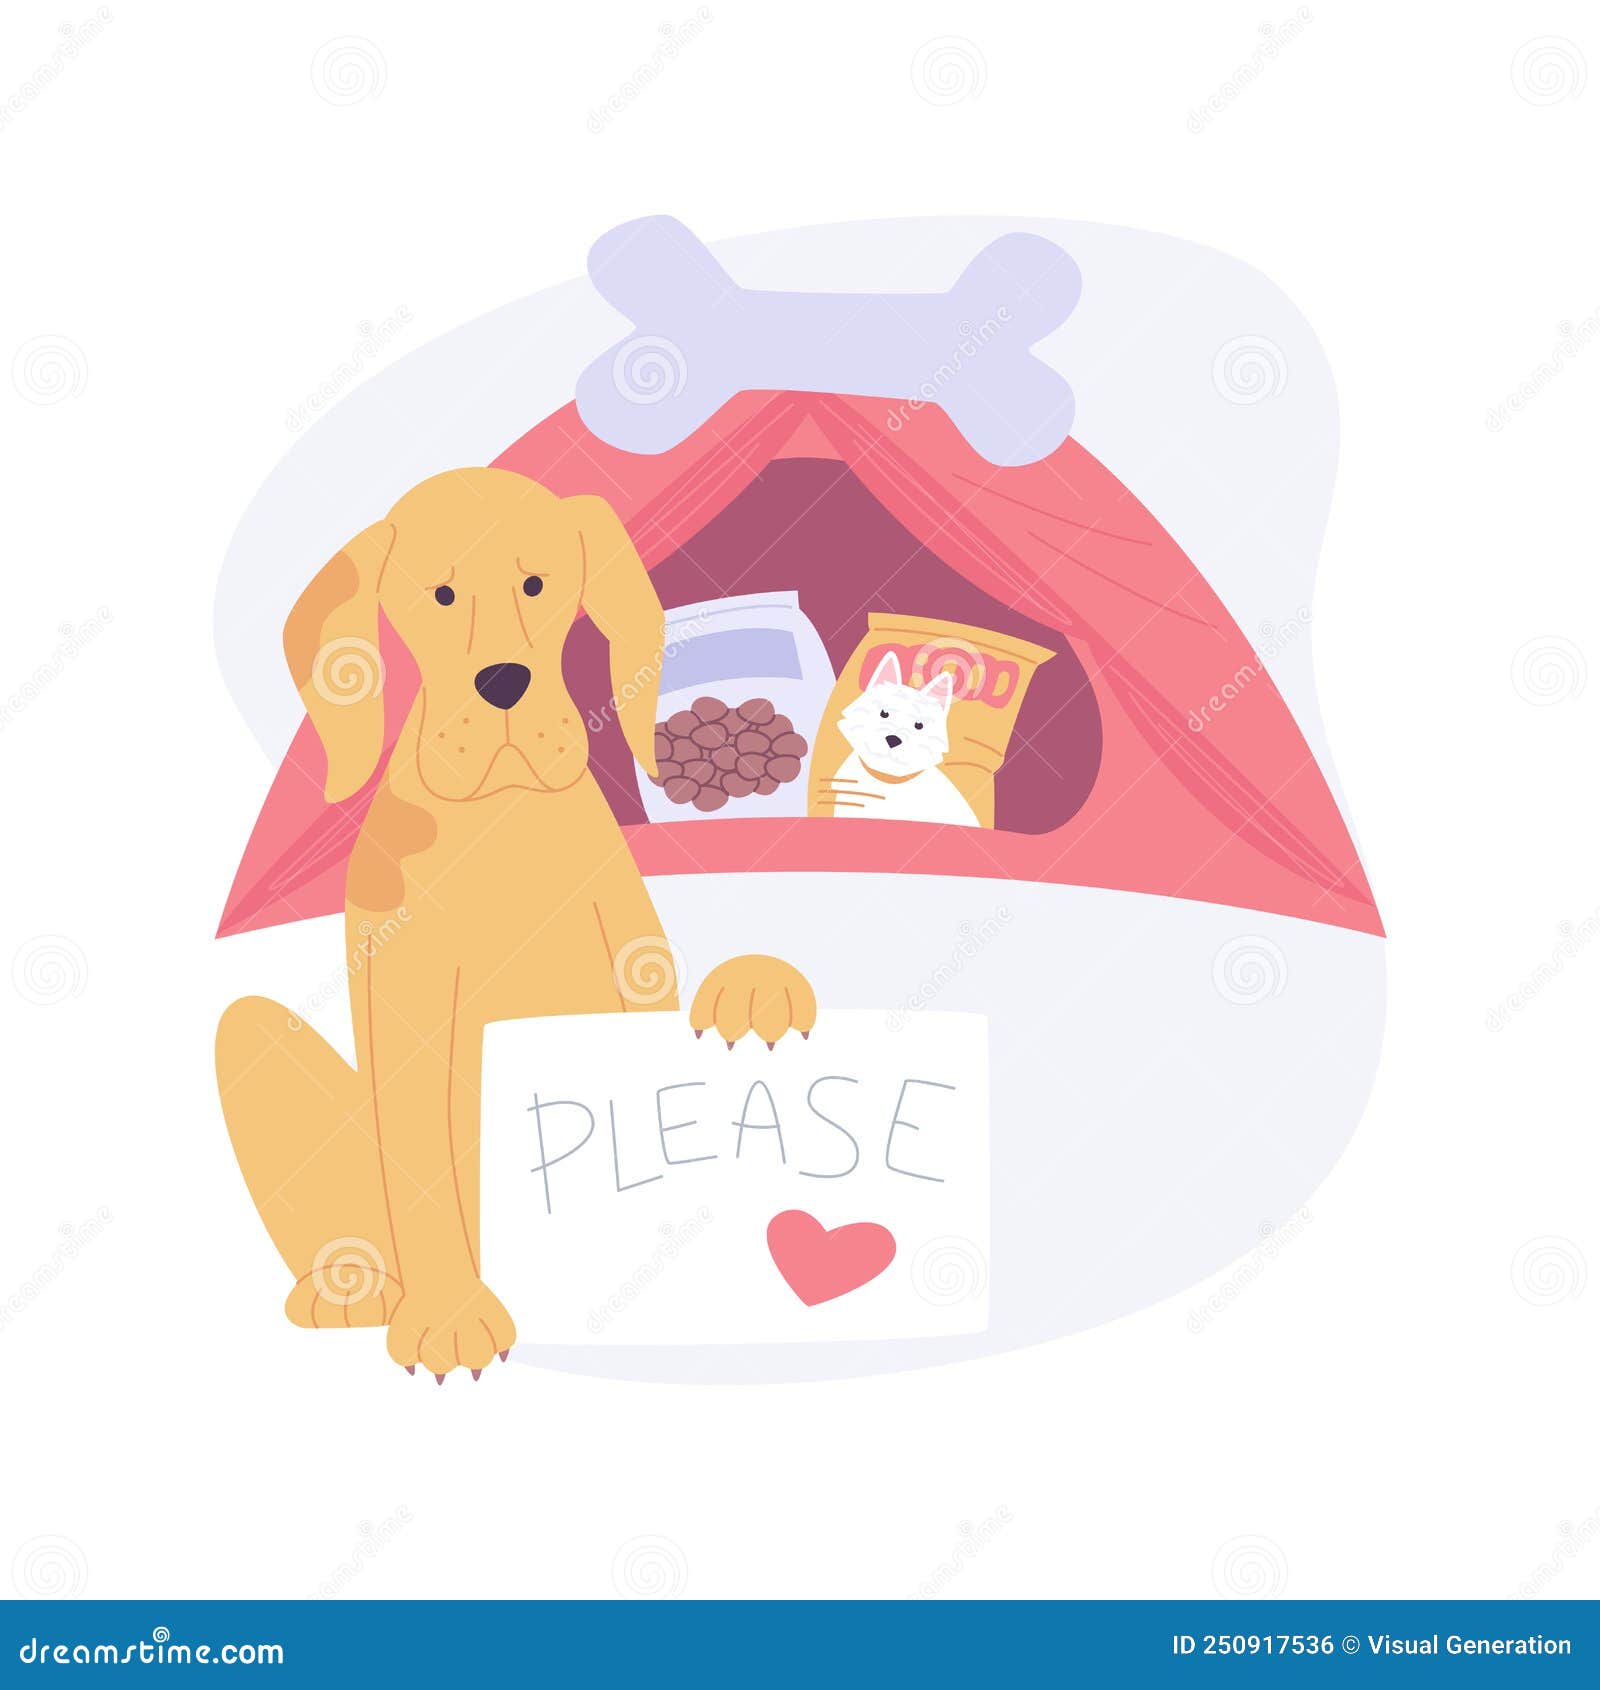 Donate To Animal Shelter Isolated Cartoon Vector Illustrations. Stock  Vector - Illustration of social, concept: 250917536